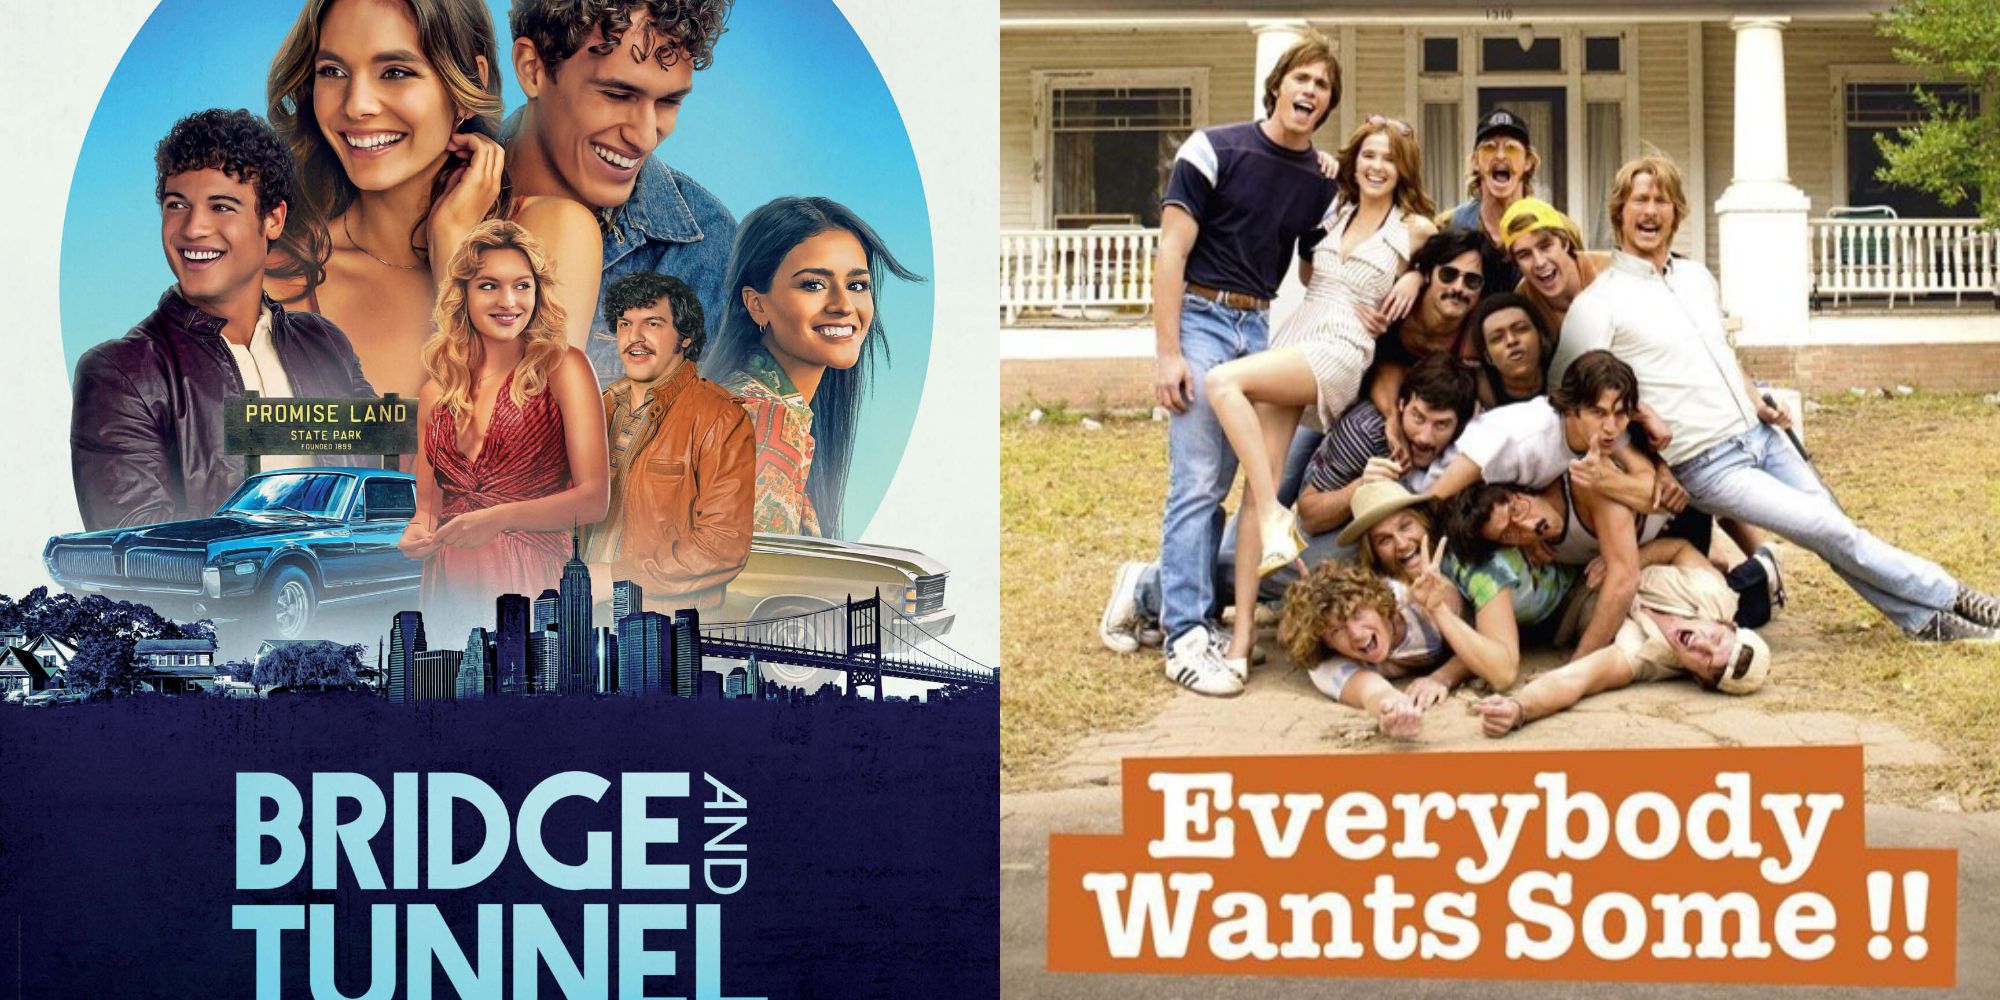 Split image showing posters for the films Bridge and Tunnel and Everybody Wants Some!